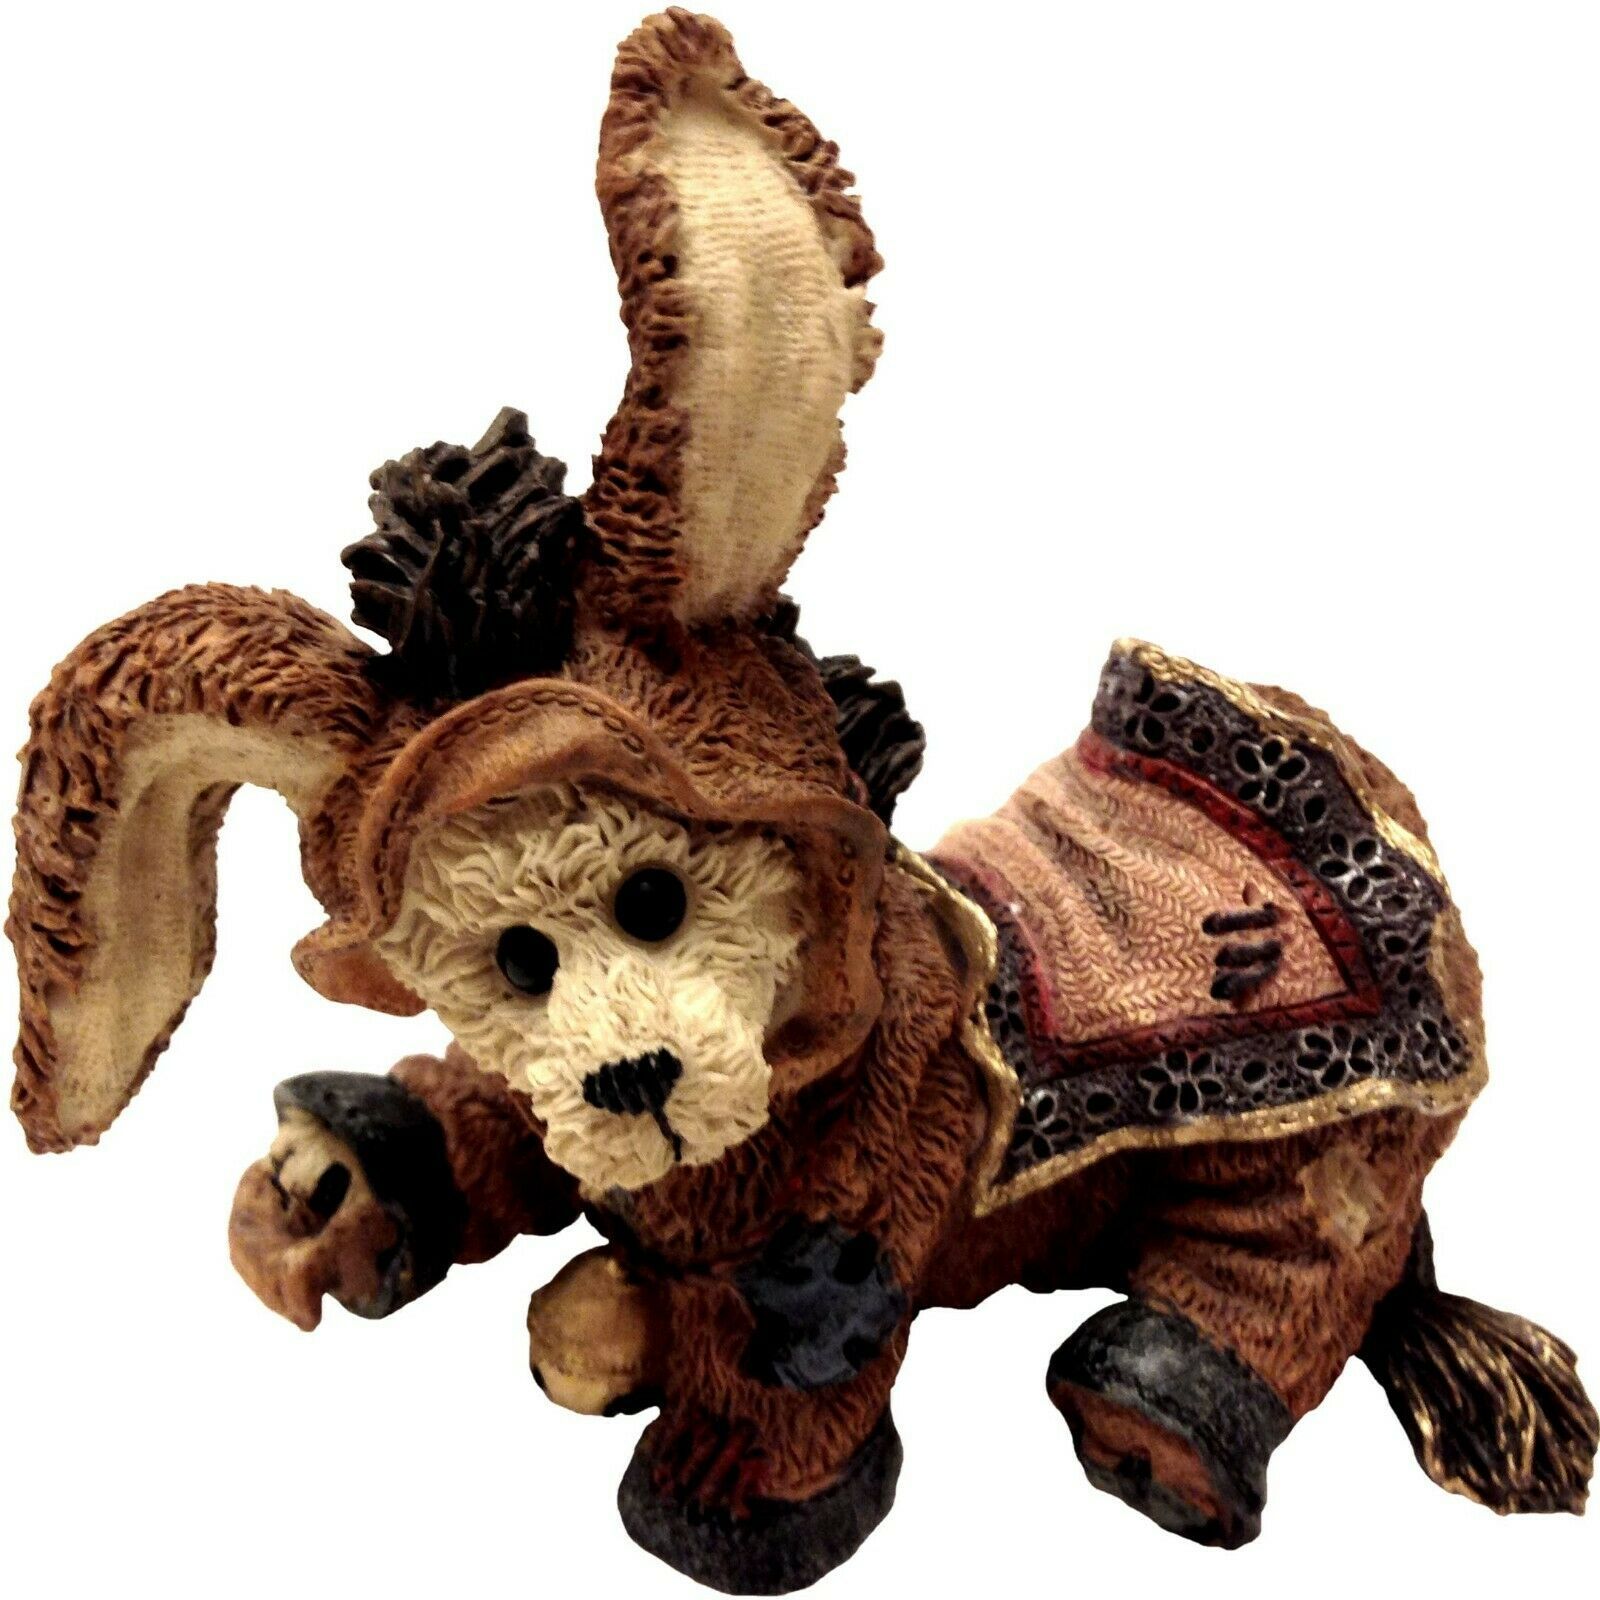 Boyds Bears, Nativity, Essex as the Donkey, PRISTINE, complete, FIRST EDITION - $23.95